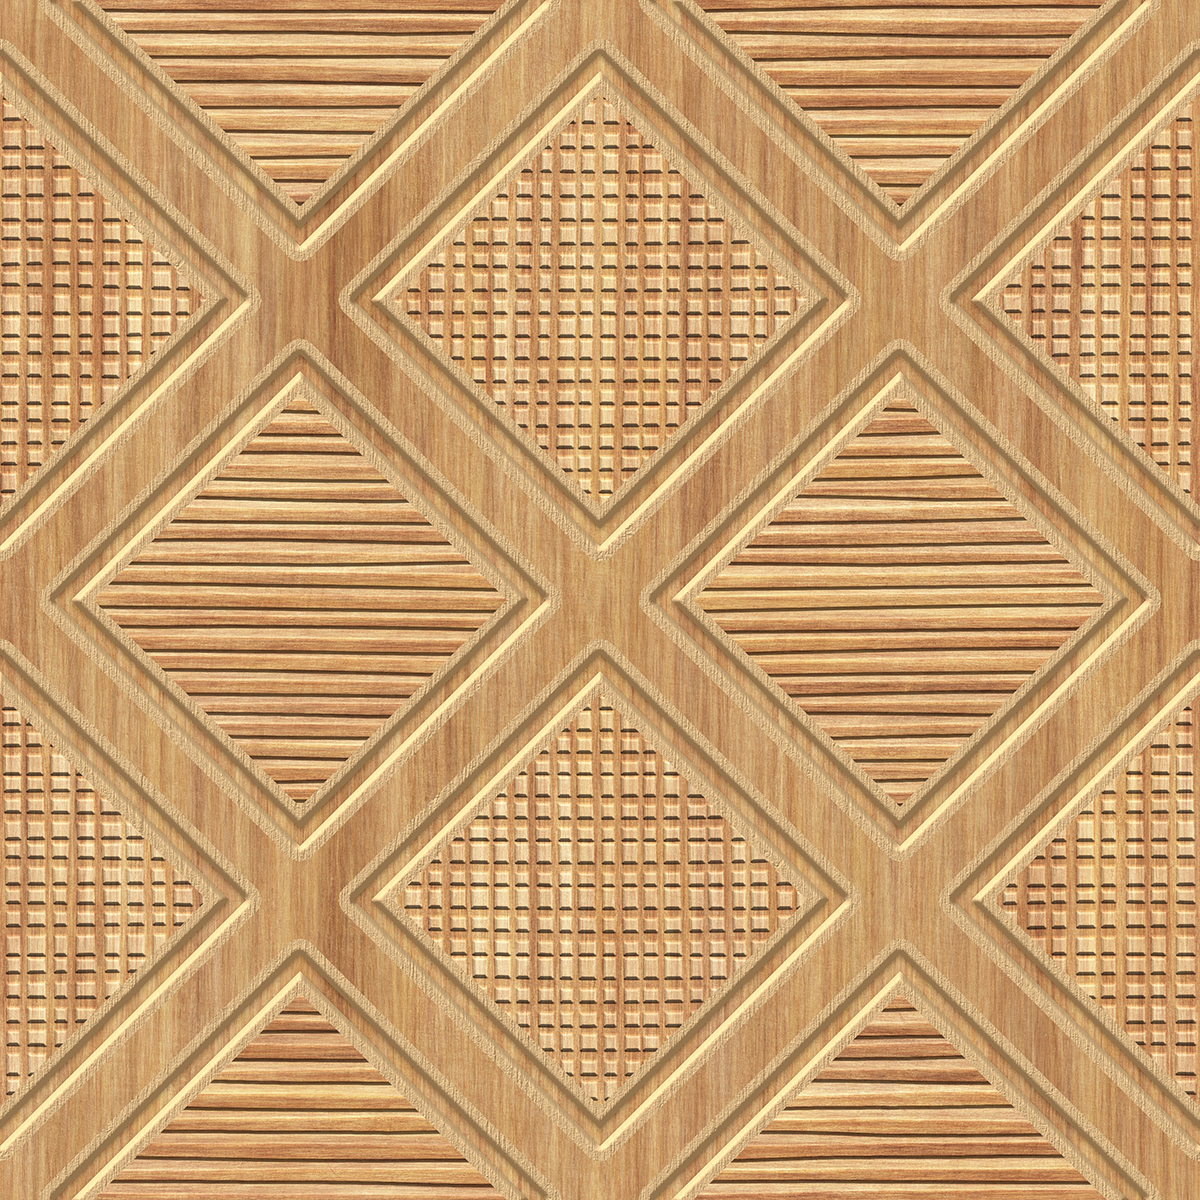 A wood panel with a pattern